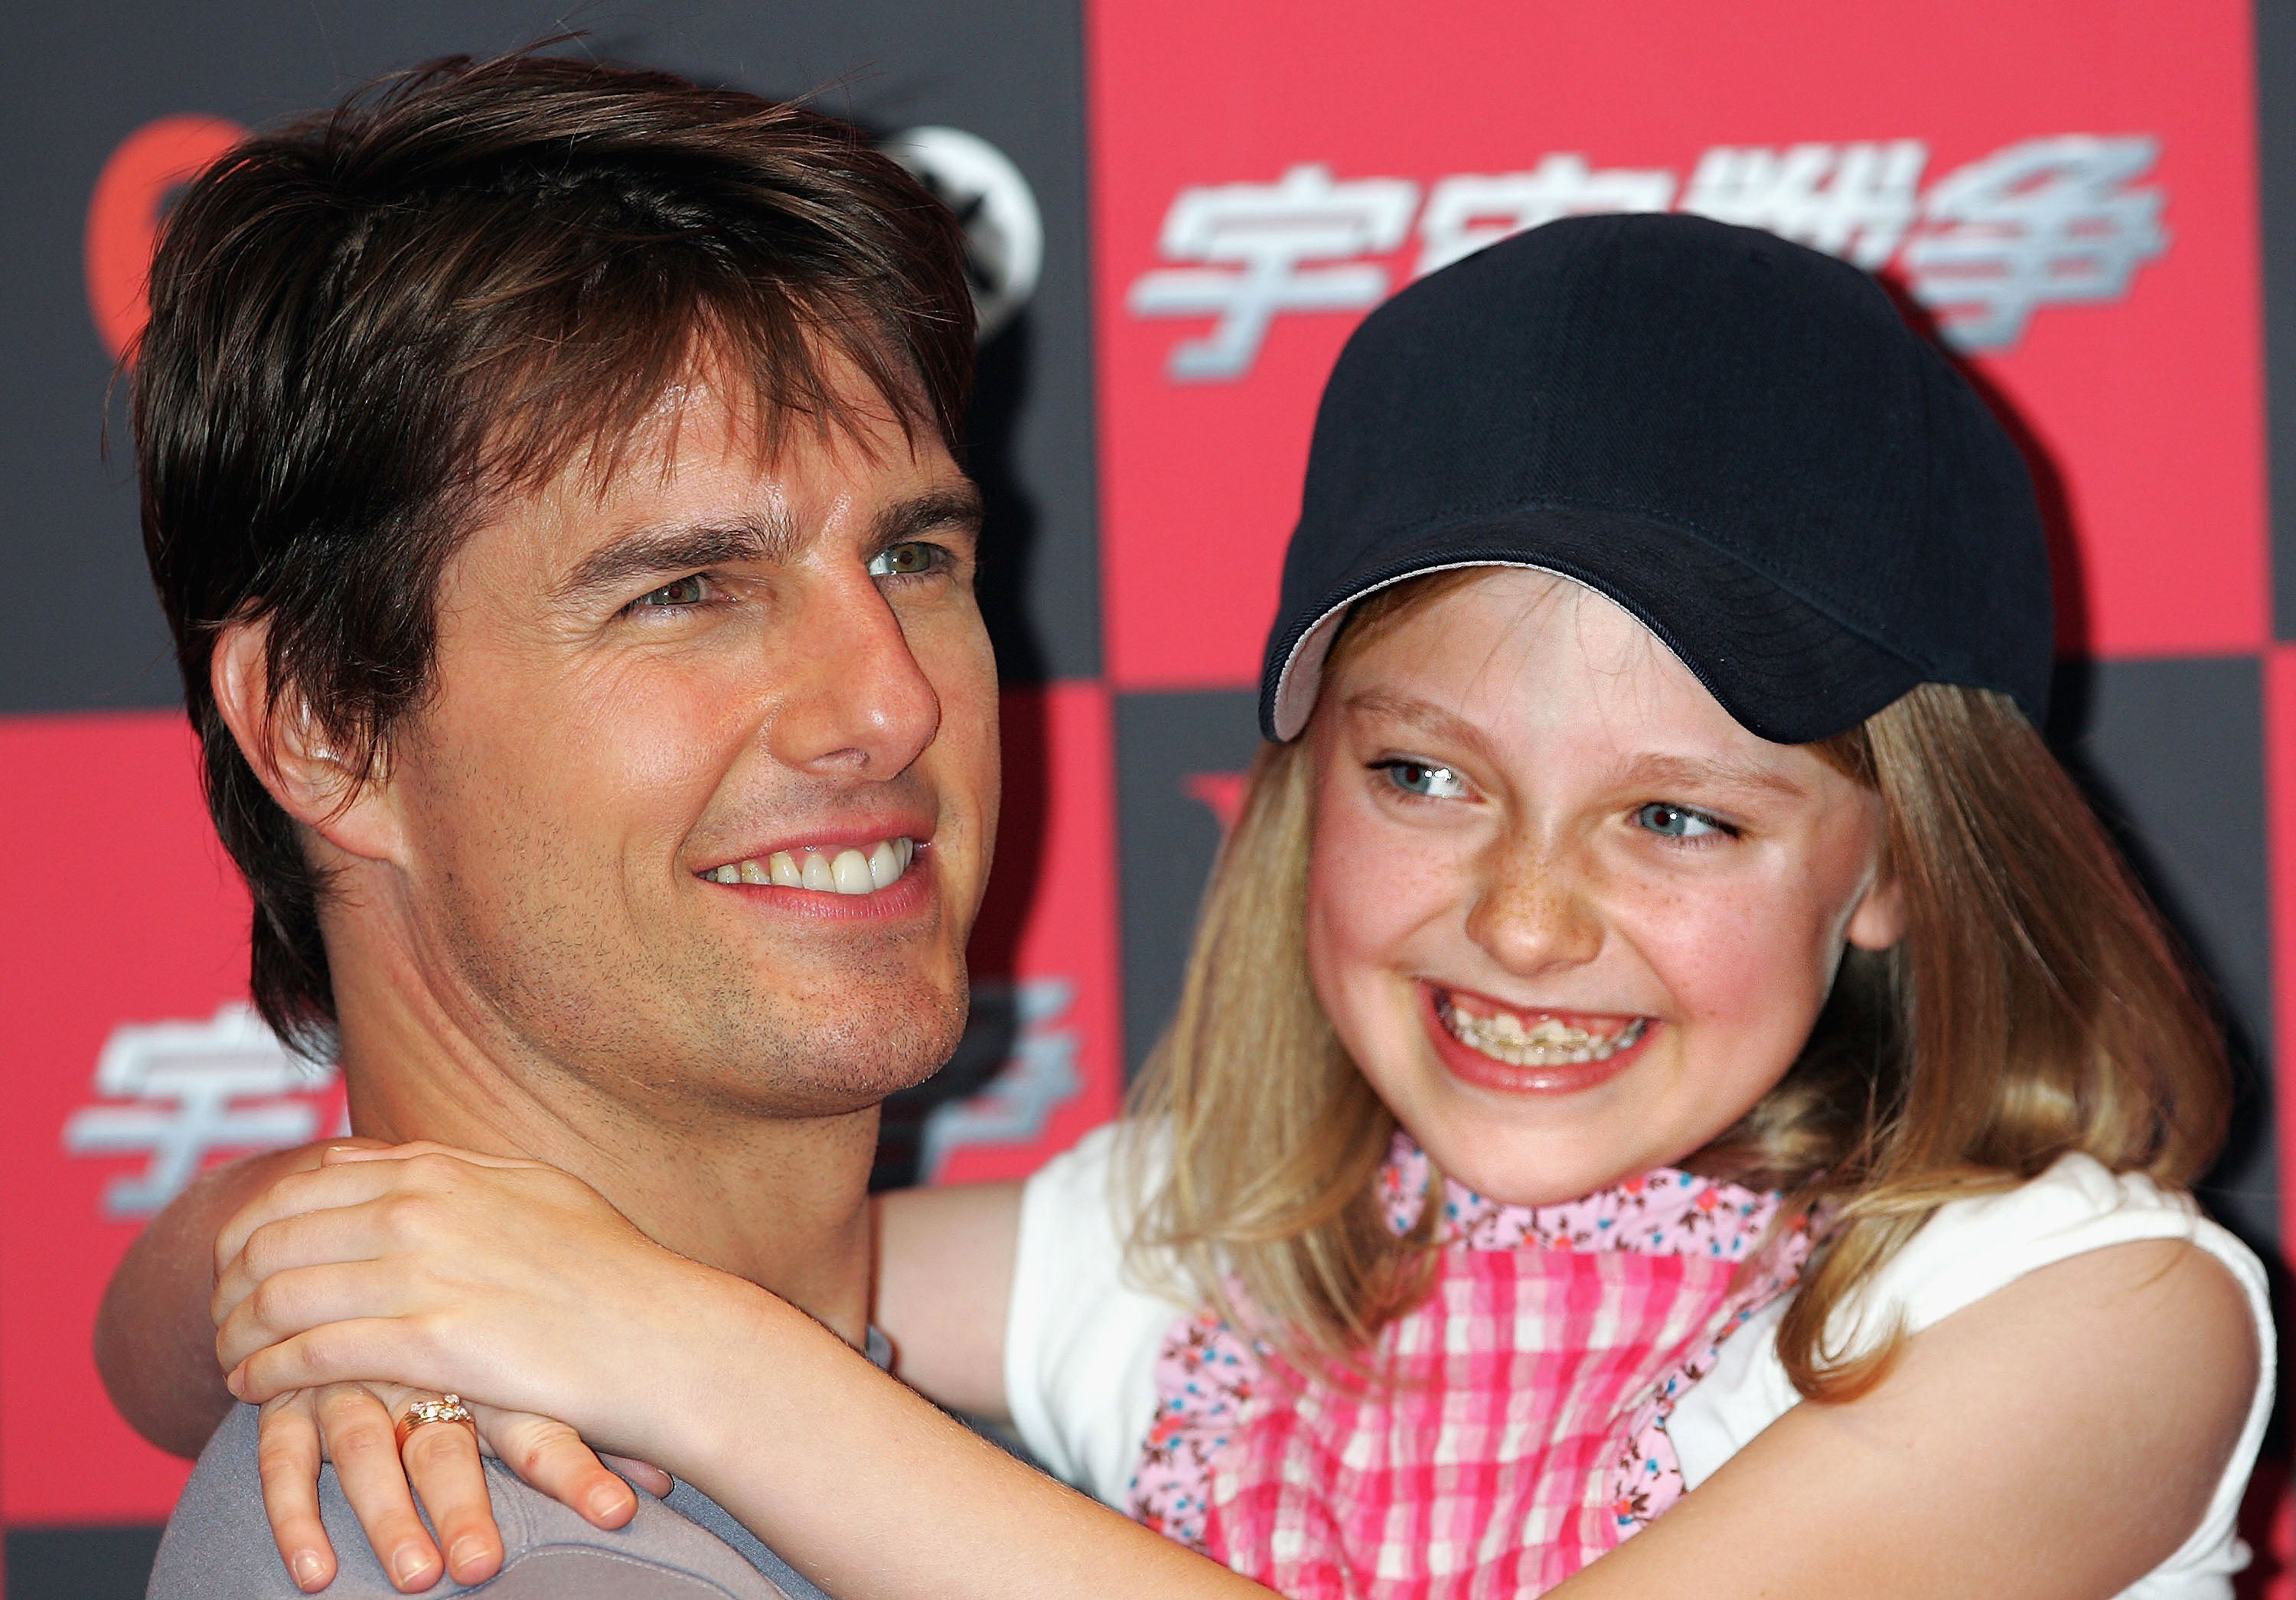 Tom Cruise and Dakota Fanning attend a photo call to promote ‘War of the Worlds’ on June 13, 2005 in Tokyo, Japan